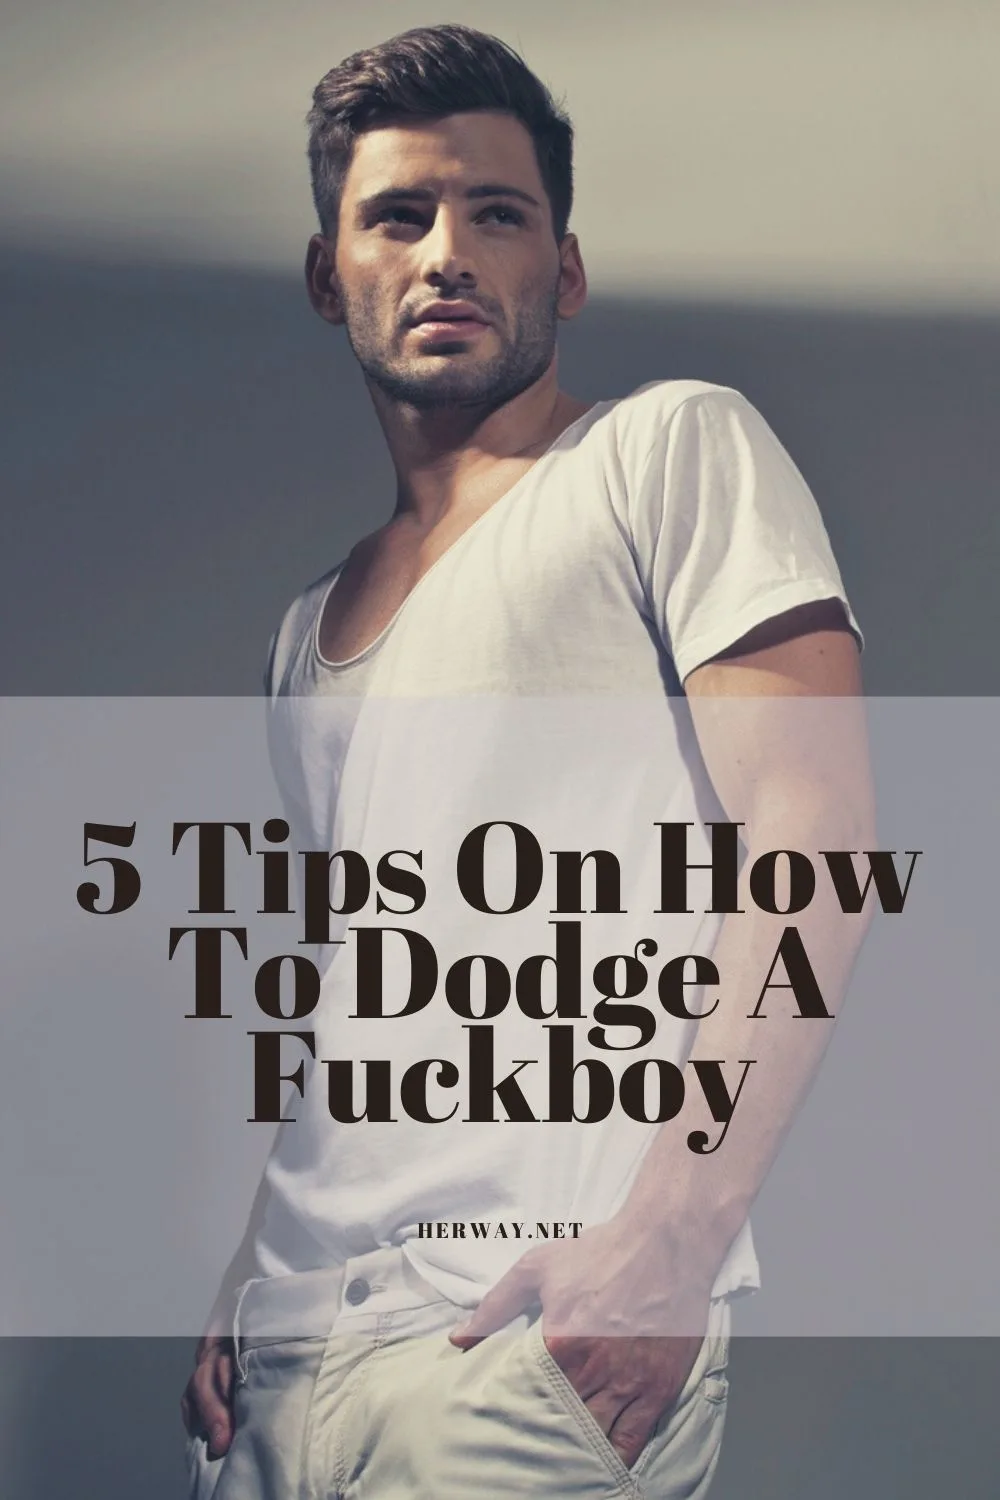 5 Tips On How To Dodge A Fuckboy